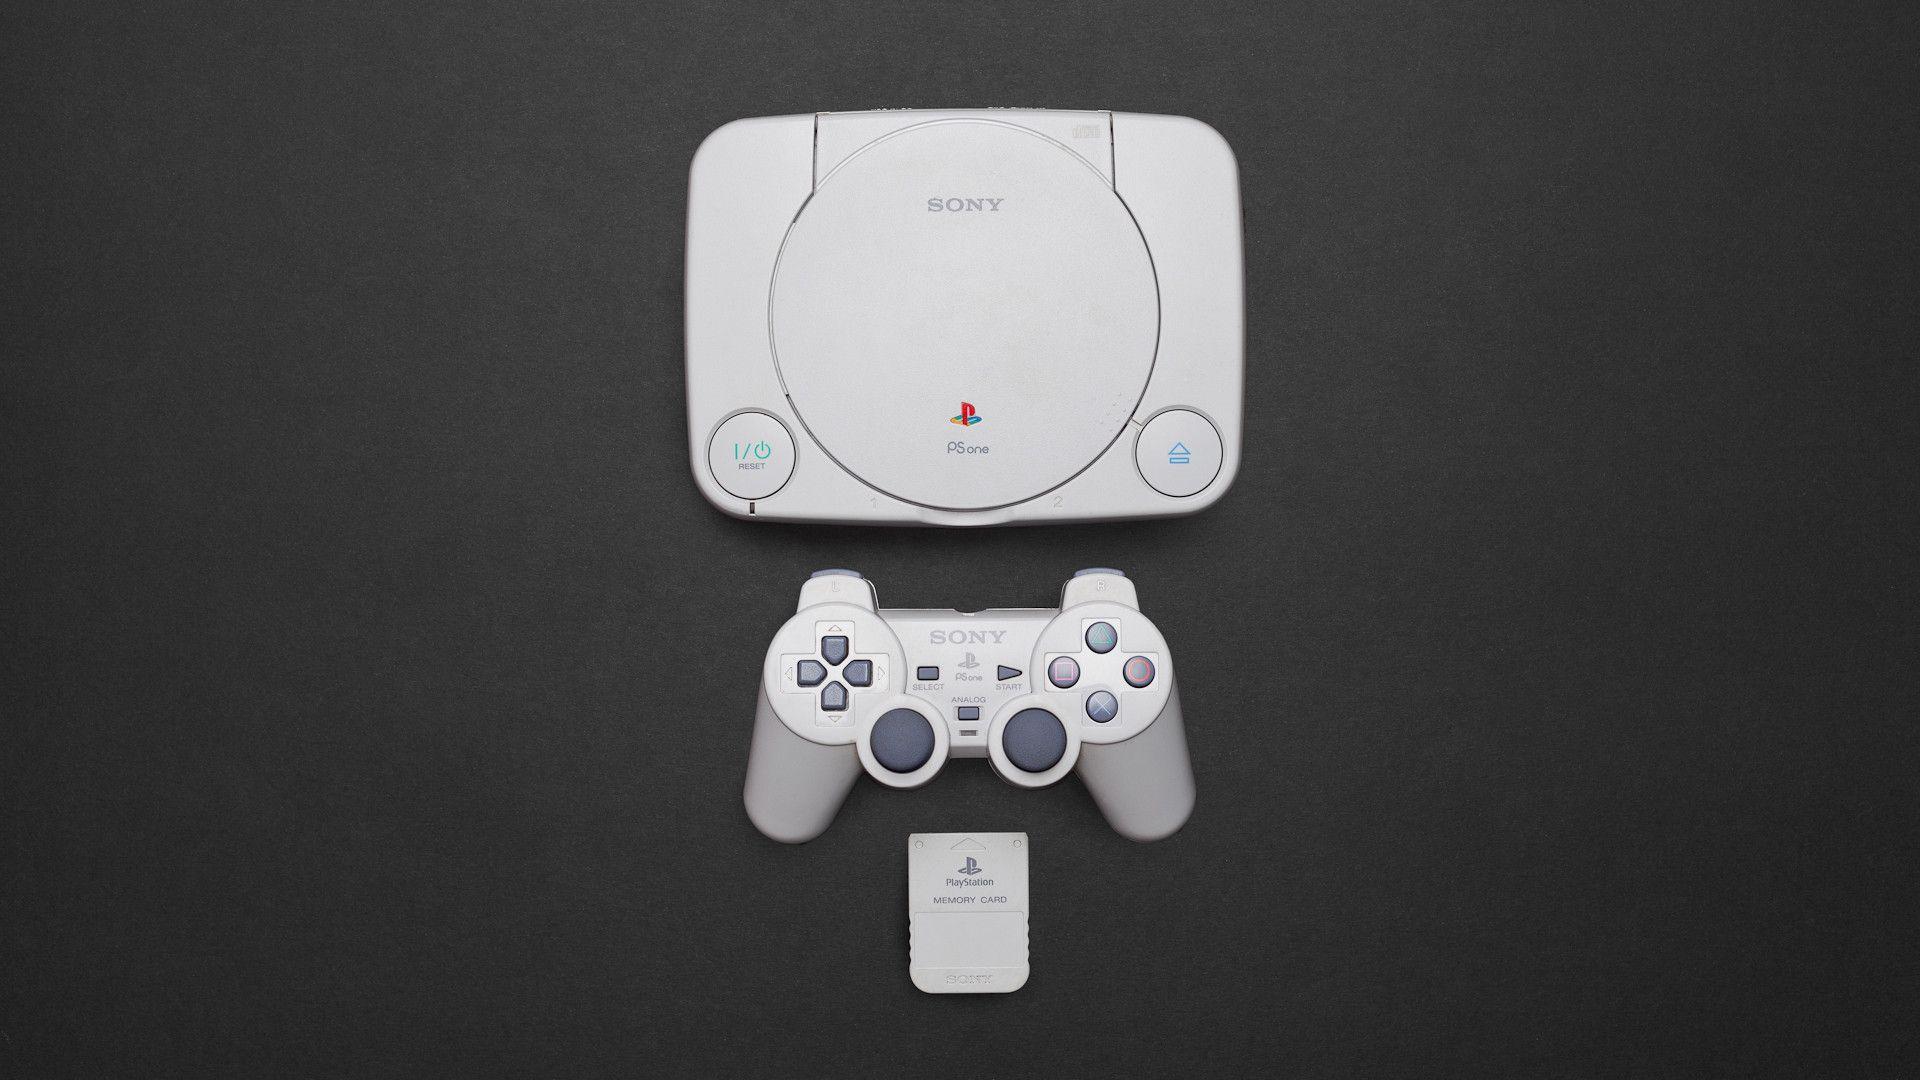 In honor of my old PSOne [1920x1080]